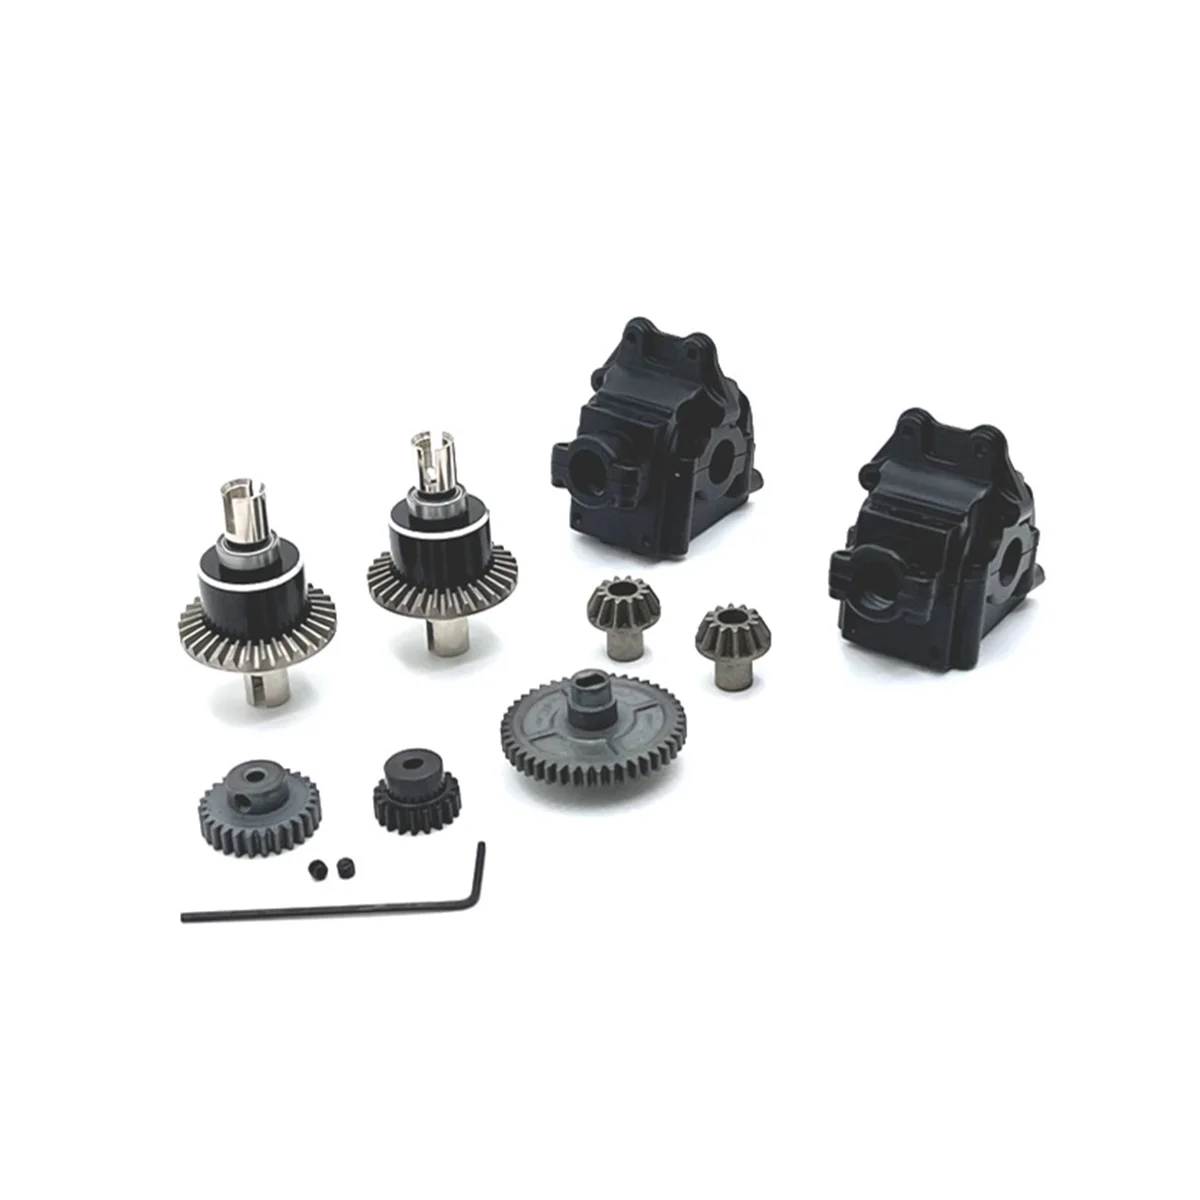 

Metal Gearbox Differential Gears for 144001 124016 124019 124007 -001 -006 AM-X12 RC Car Parts,6